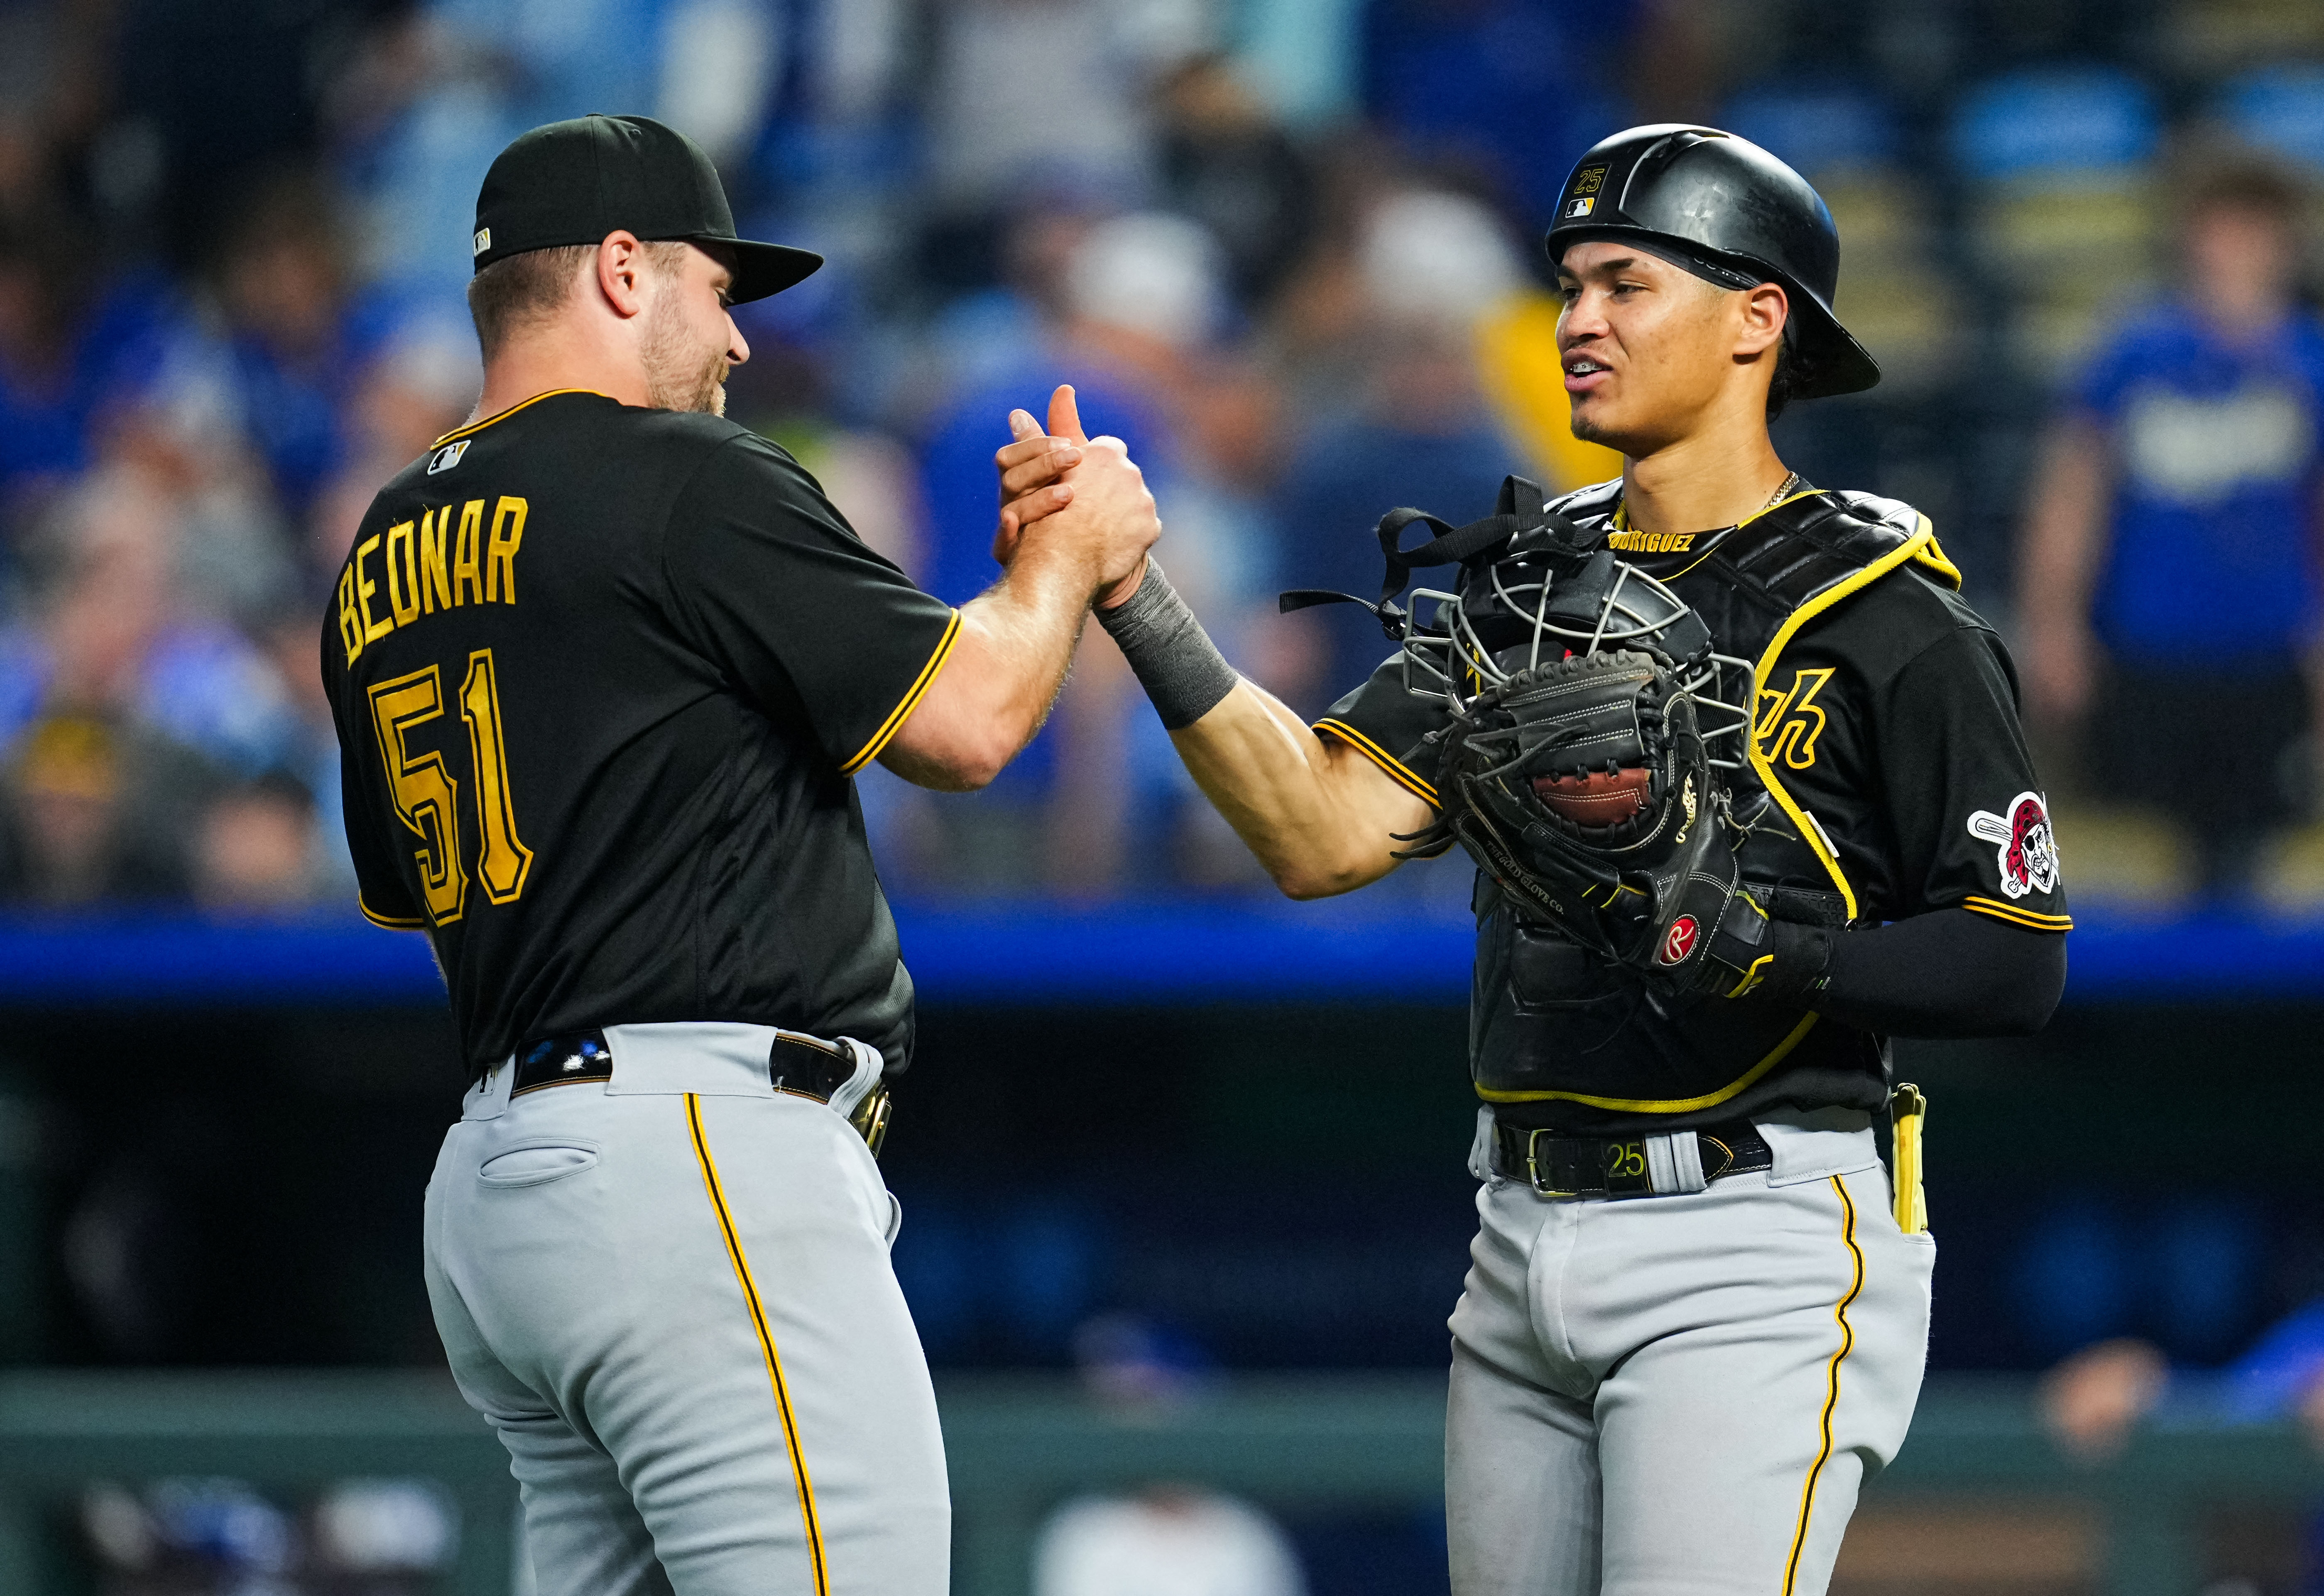 Andre Jackson gets first big league win as Pirates sweep Royals